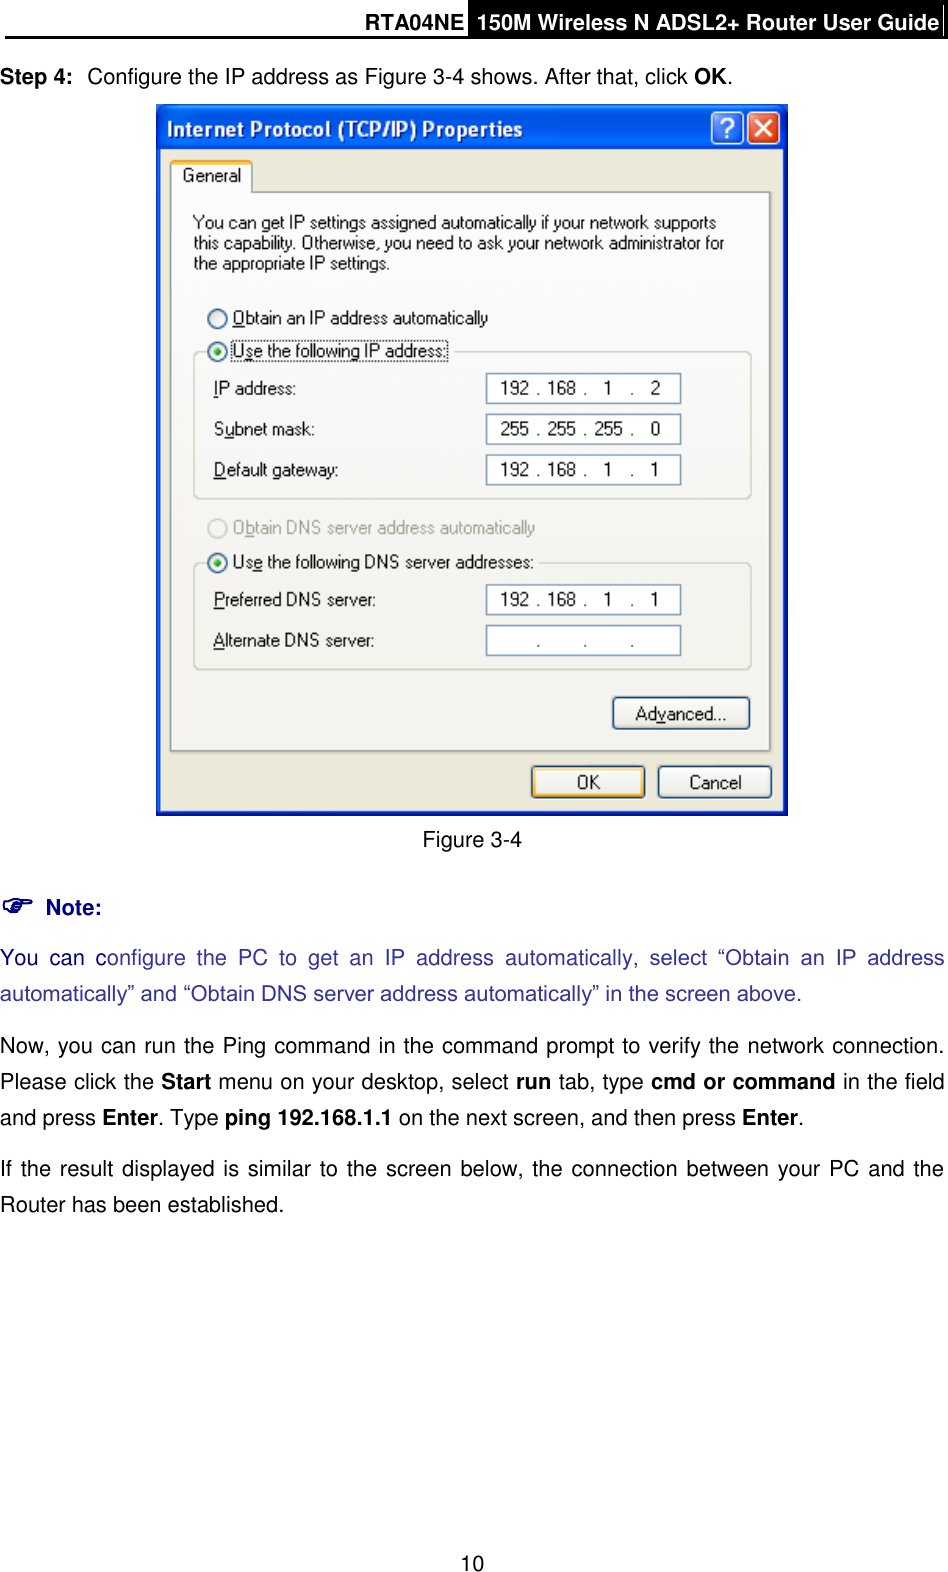 RTA04NE 150M Wireless N ADSL2+ Router User Guide  10 Step 4:  Configure the IP address as Figure 3-4 shows. After that, click OK.  Figure 3-4  Note: You  can  configure  the  PC  to  get  an  IP  address  automatically,  select  “Obtain  an  IP  address automatically” and “Obtain DNS server address automatically” in the screen above.   Now, you can run the Ping command in the command prompt to verify the network connection. Please click the Start menu on your desktop, select run tab, type cmd or command in the field and press Enter. Type ping 192.168.1.1 on the next screen, and then press Enter. If the result displayed is similar to the screen below, the connection between your PC and the Router has been established. 